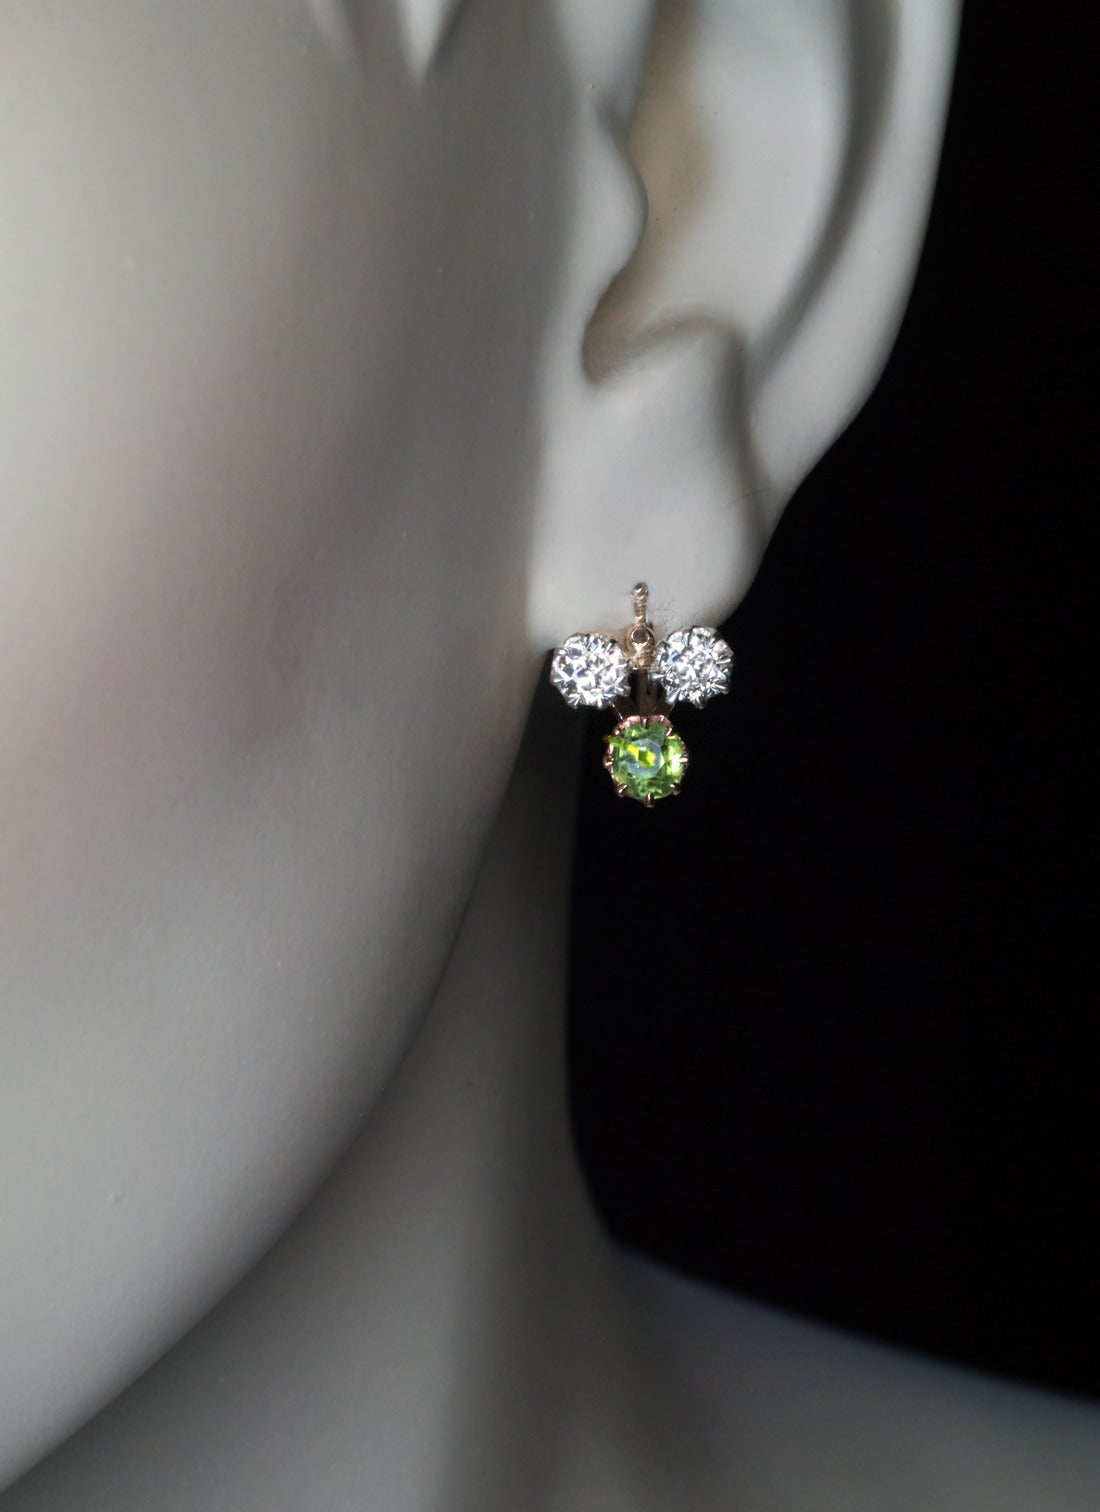 Made in Moscow between 1899 and 1908

The 14K rose gold earrings are set with four old European cut diamonds and two Russian demantoids.

Estimated total diamond weight 0.90 ct
Approximate total demantoid weight 0.77 ct

Marked with 56